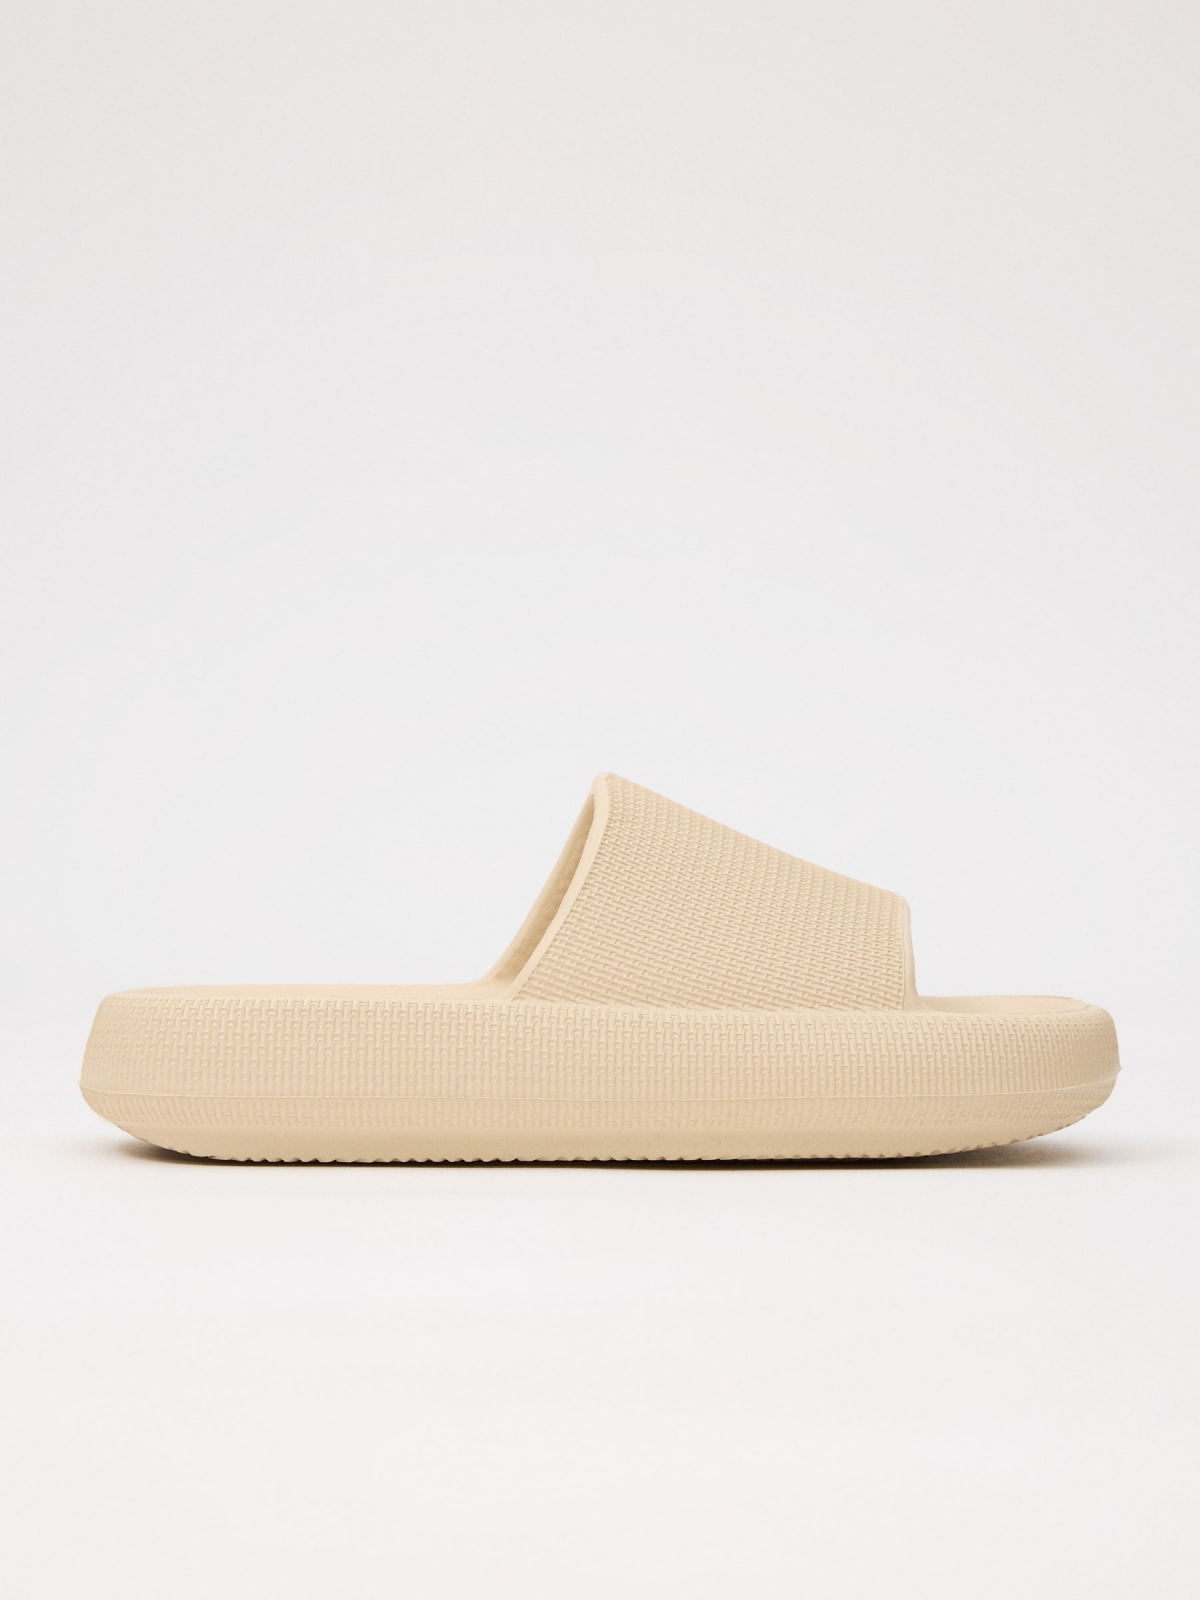 Beach flip flops with platform sand lateral view